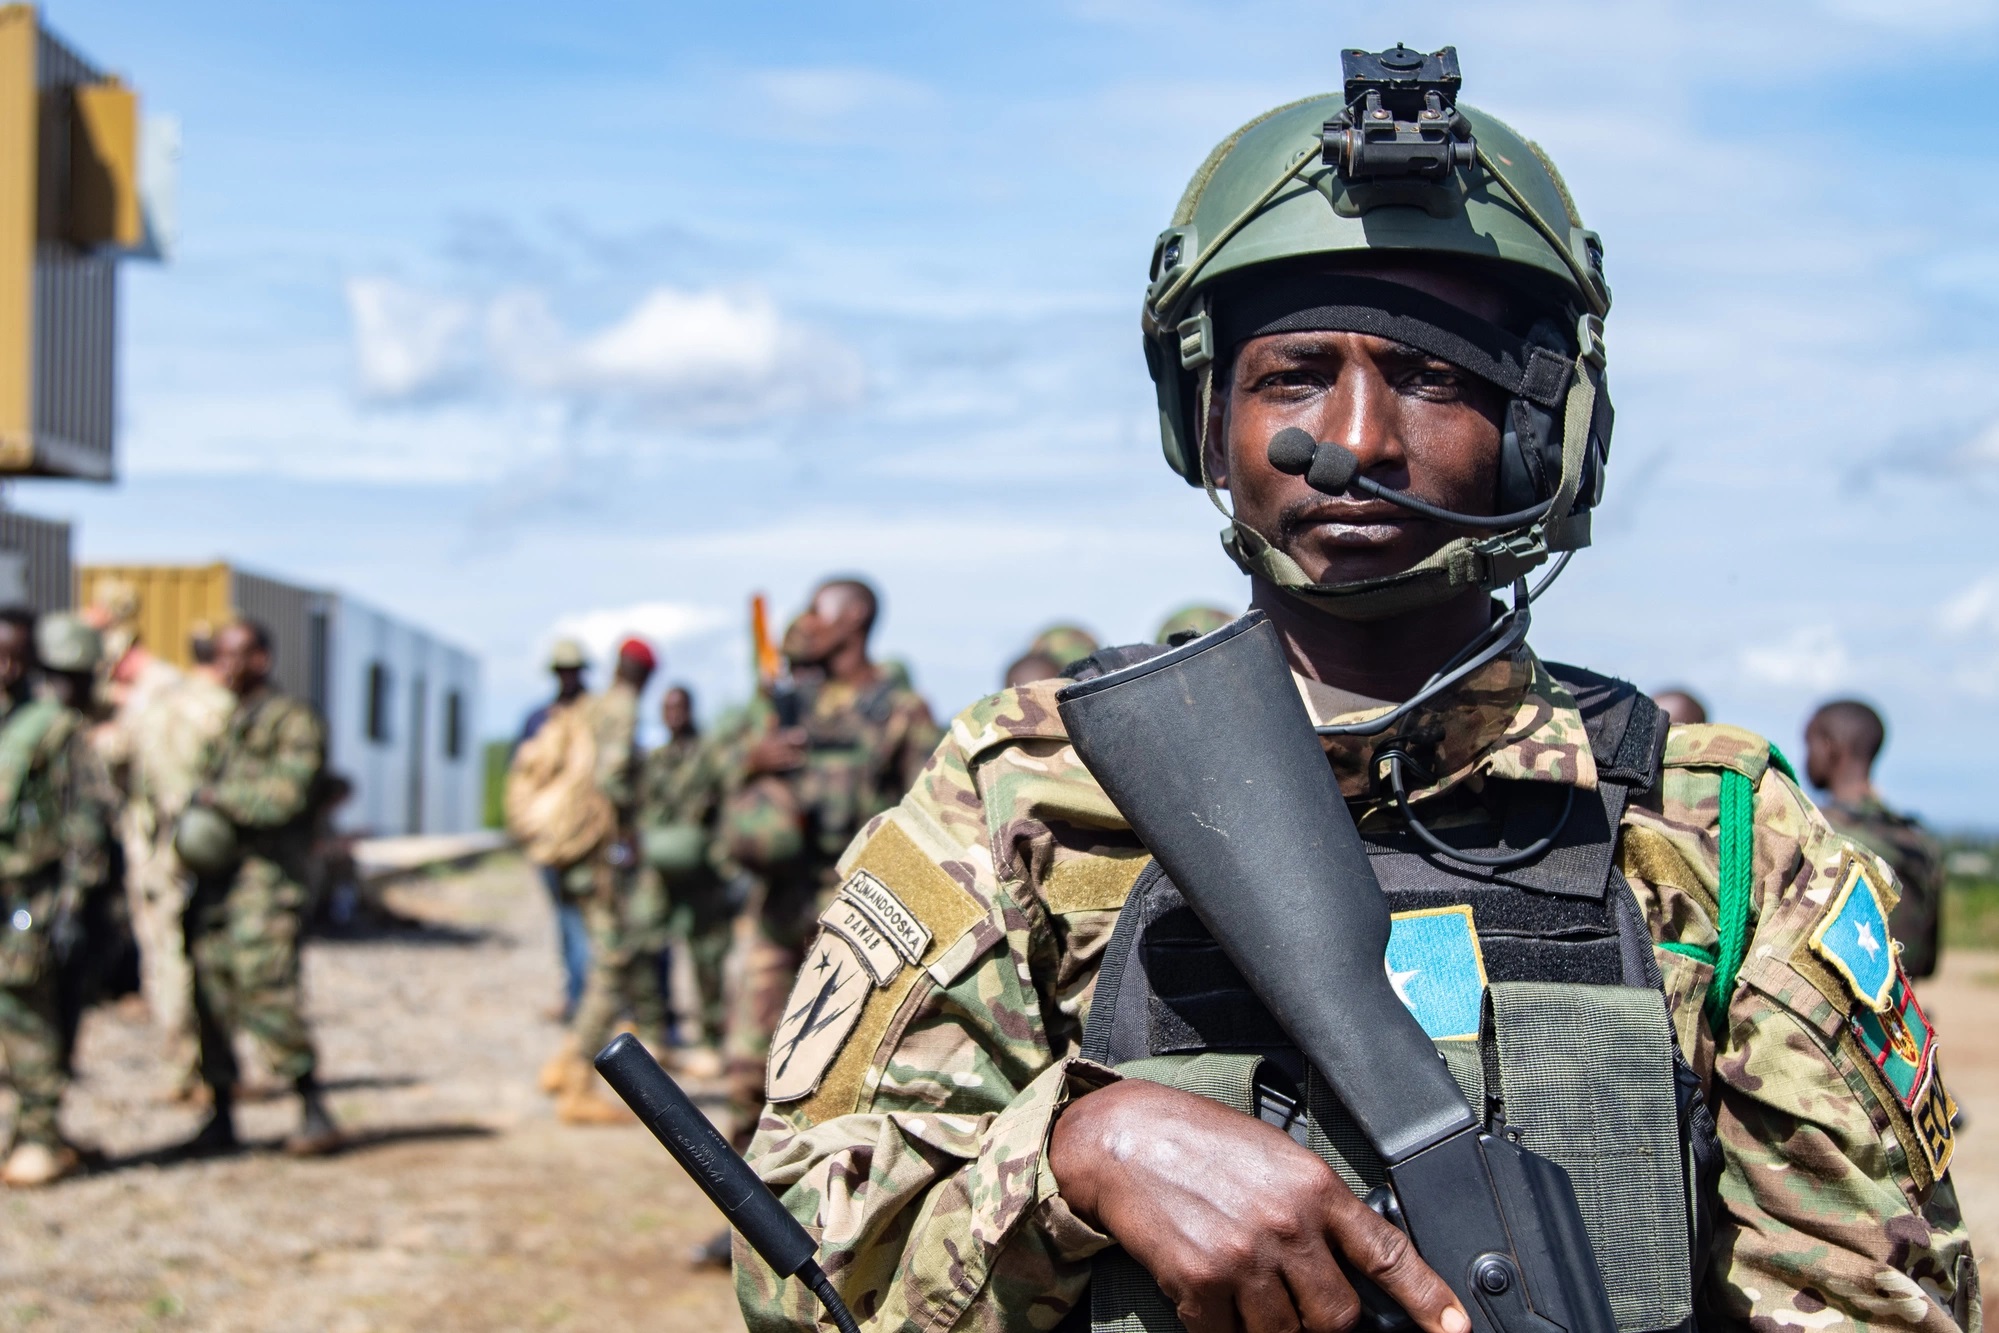 Africa is the new battleground in fight against ISIS